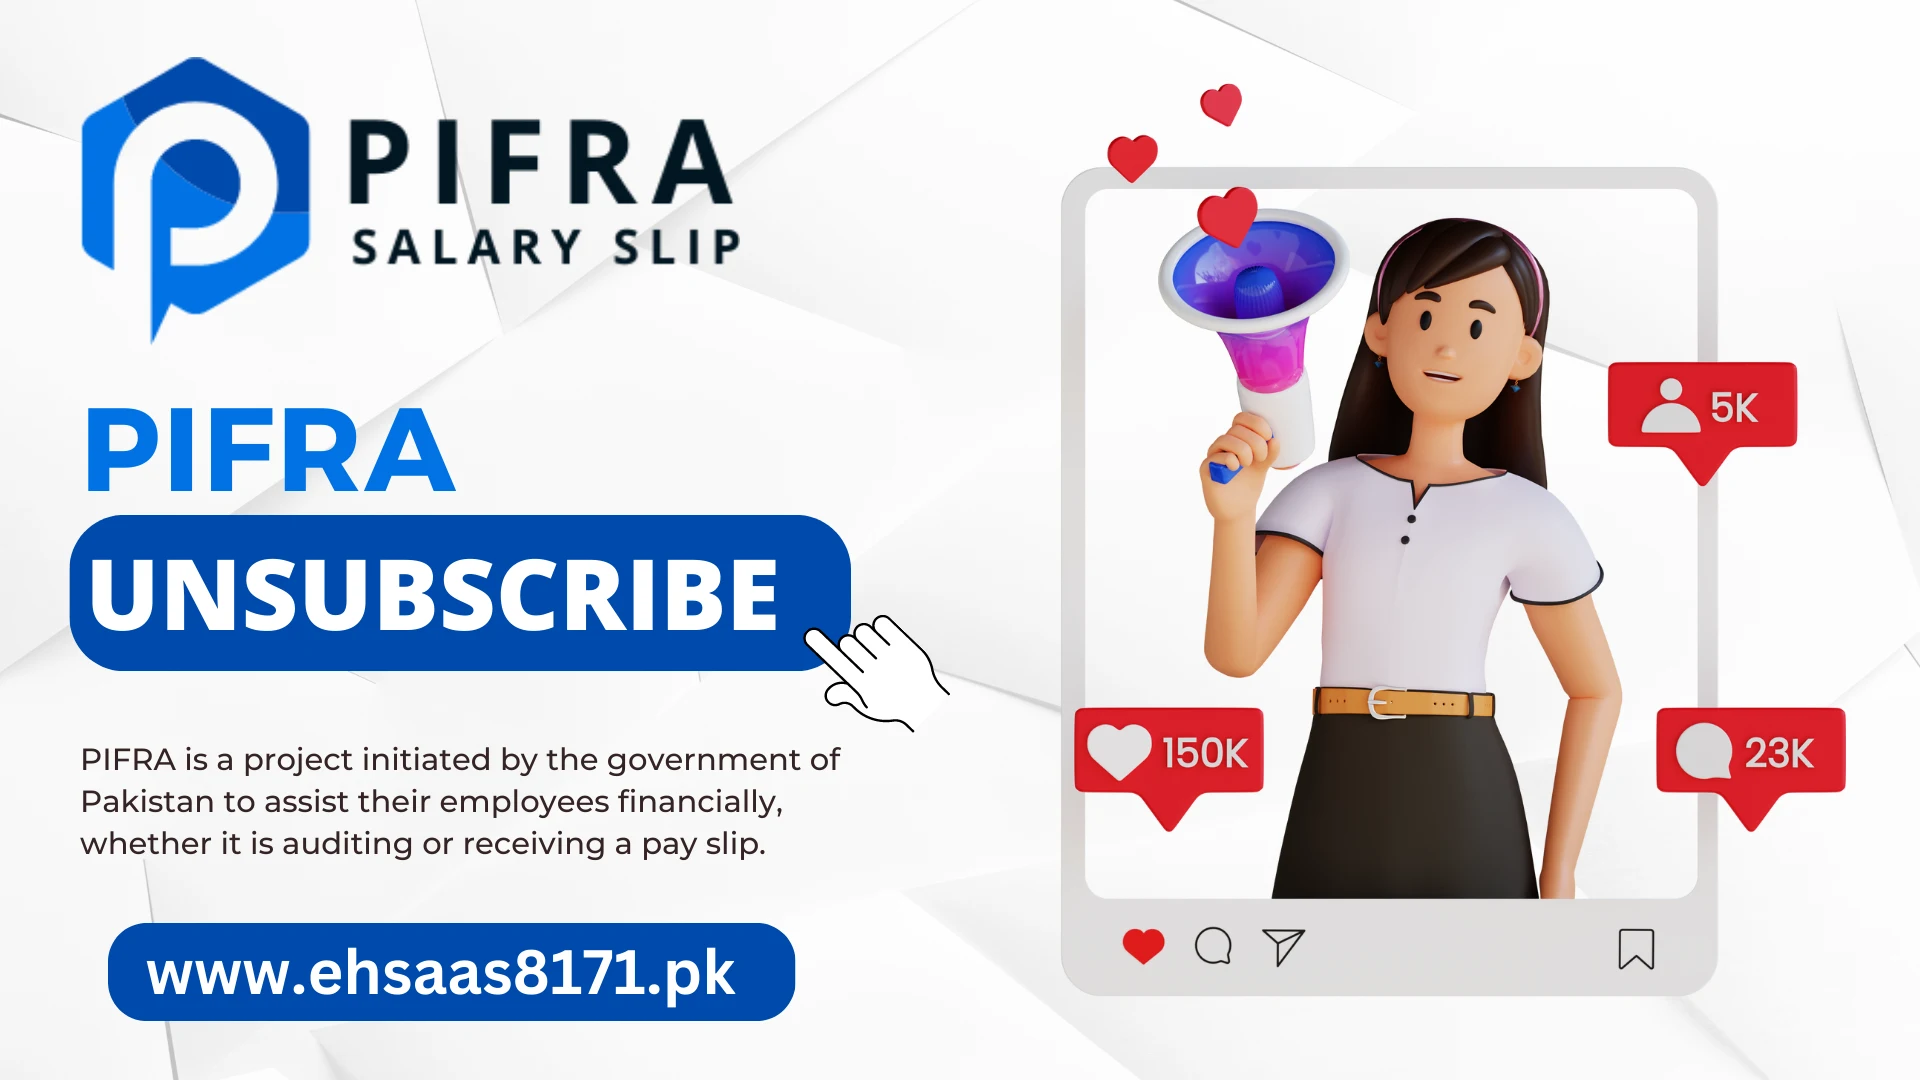 How to Unsubscribe from PIFRA